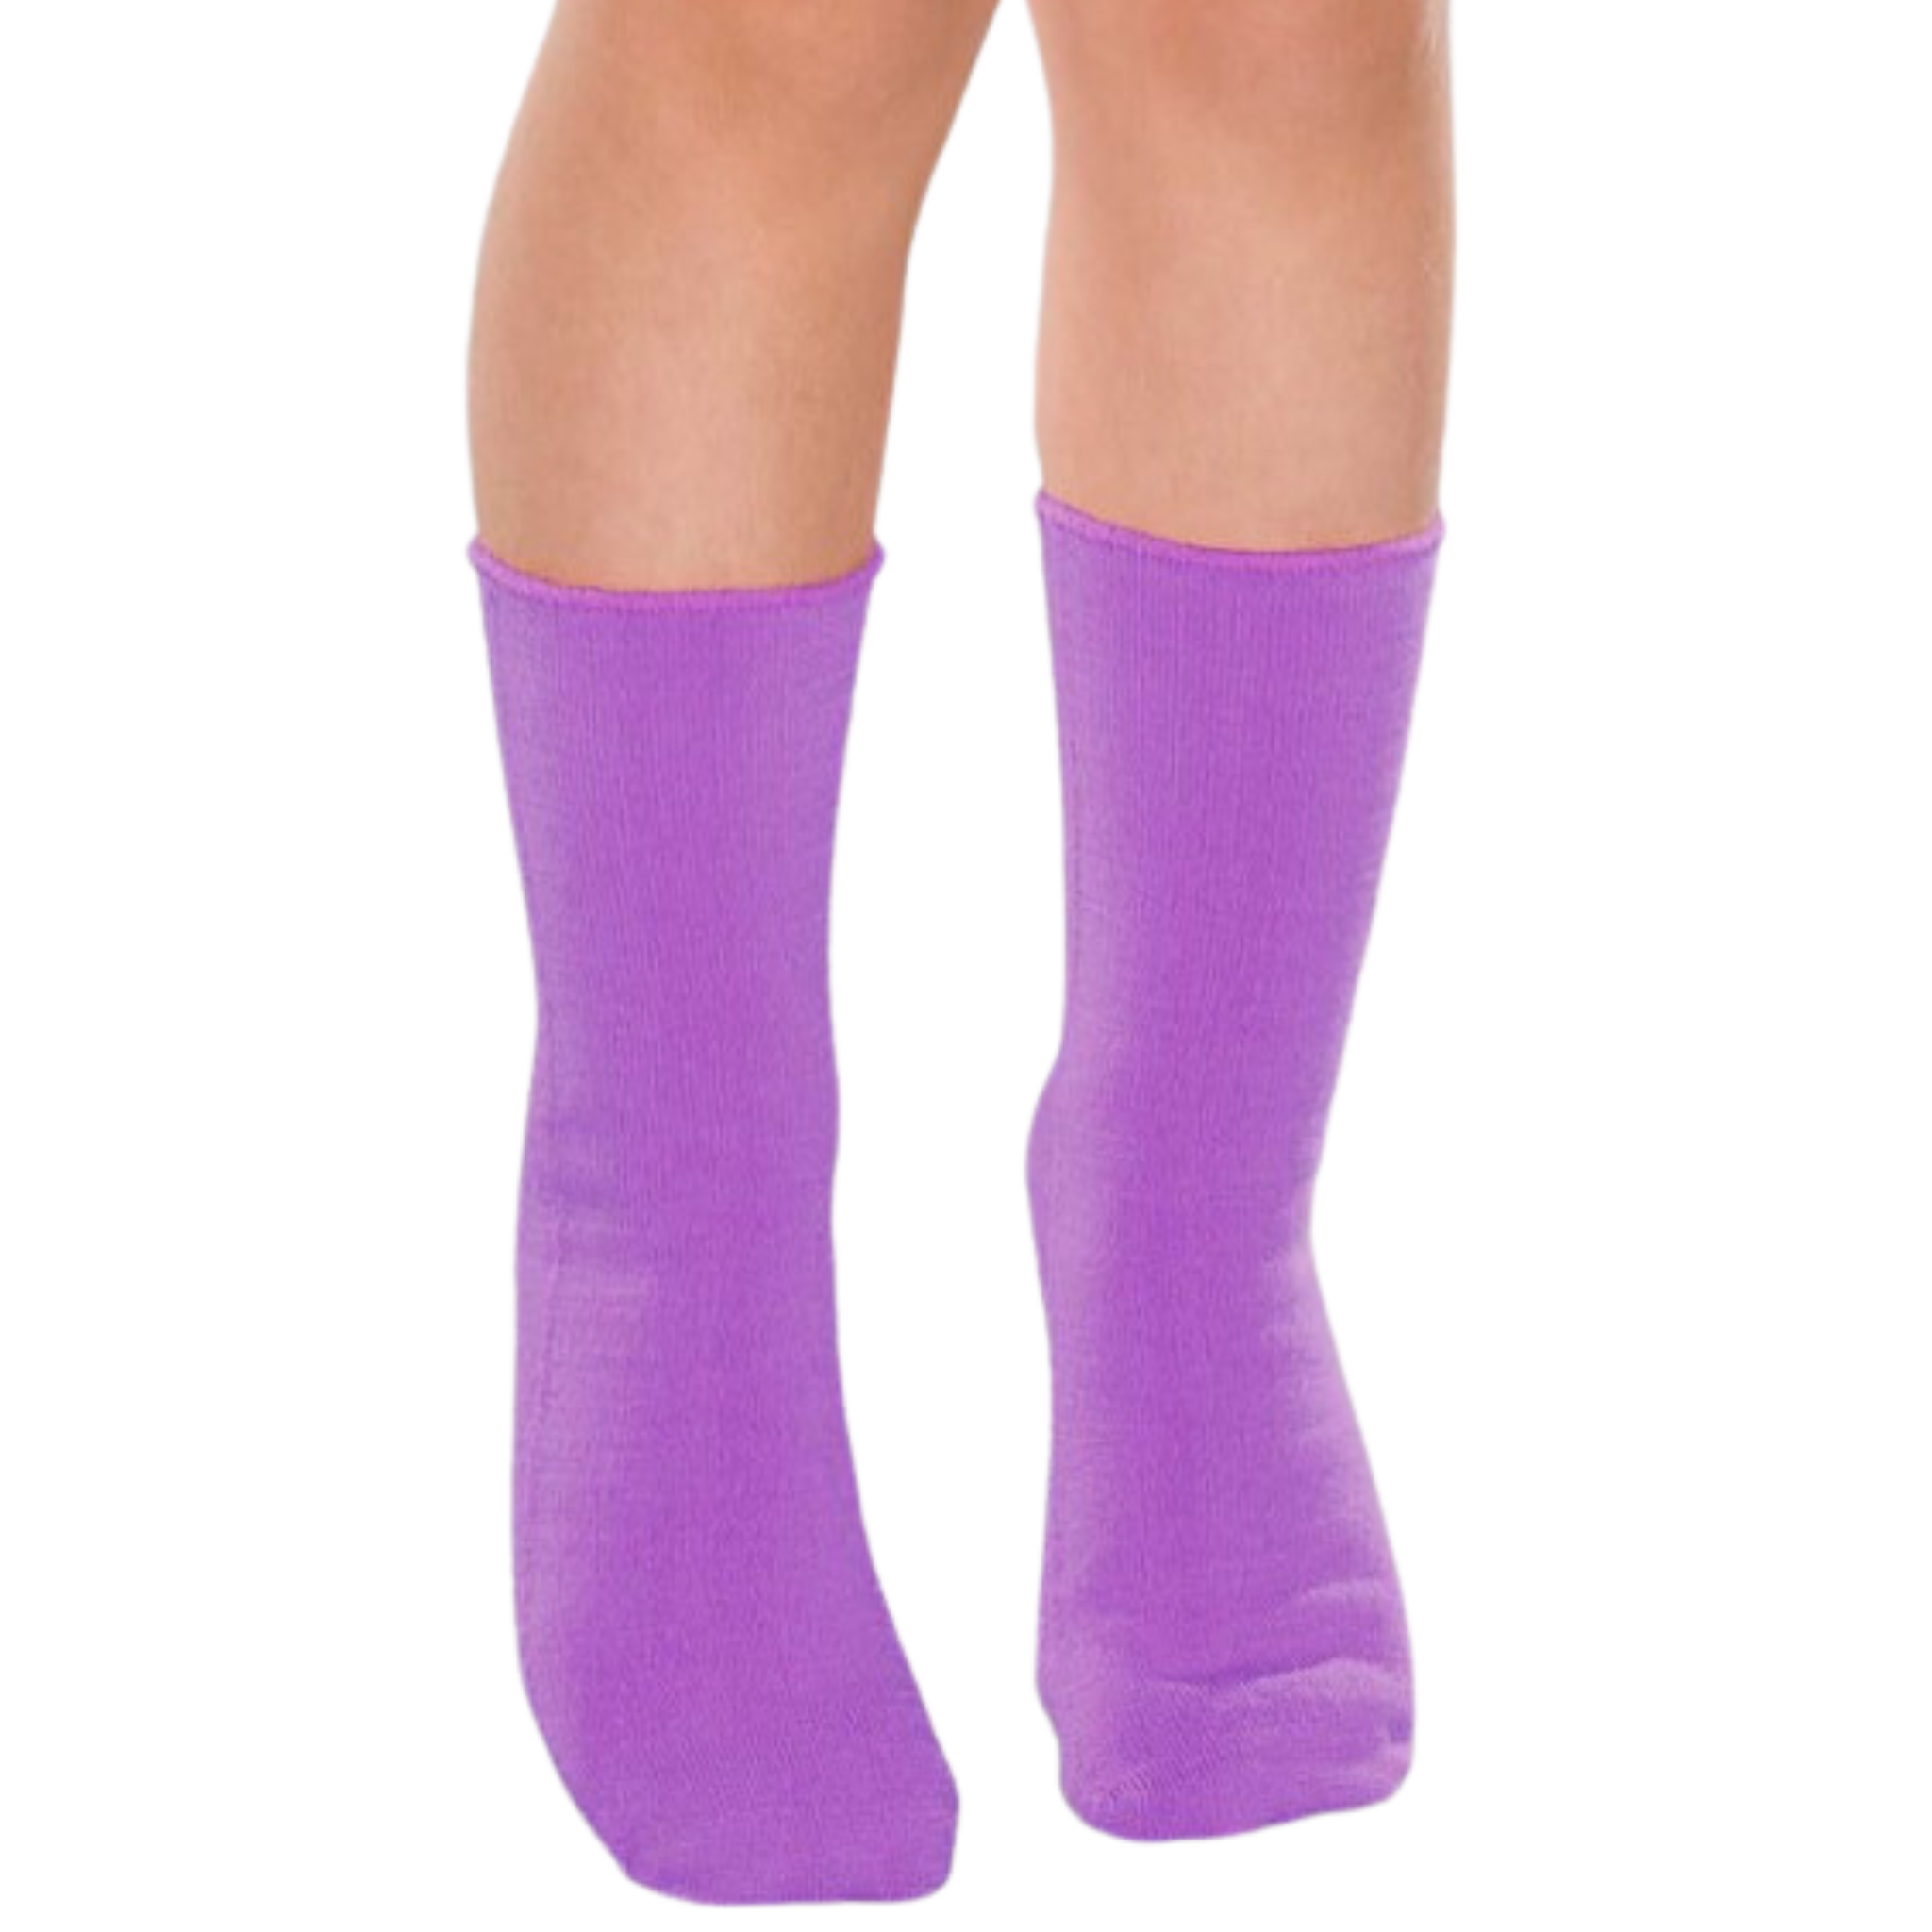 SmartKnitKIDS - Absolutely Seamless Socks - Ultimate comfort sock - Pink/Purple/White - Value Pack